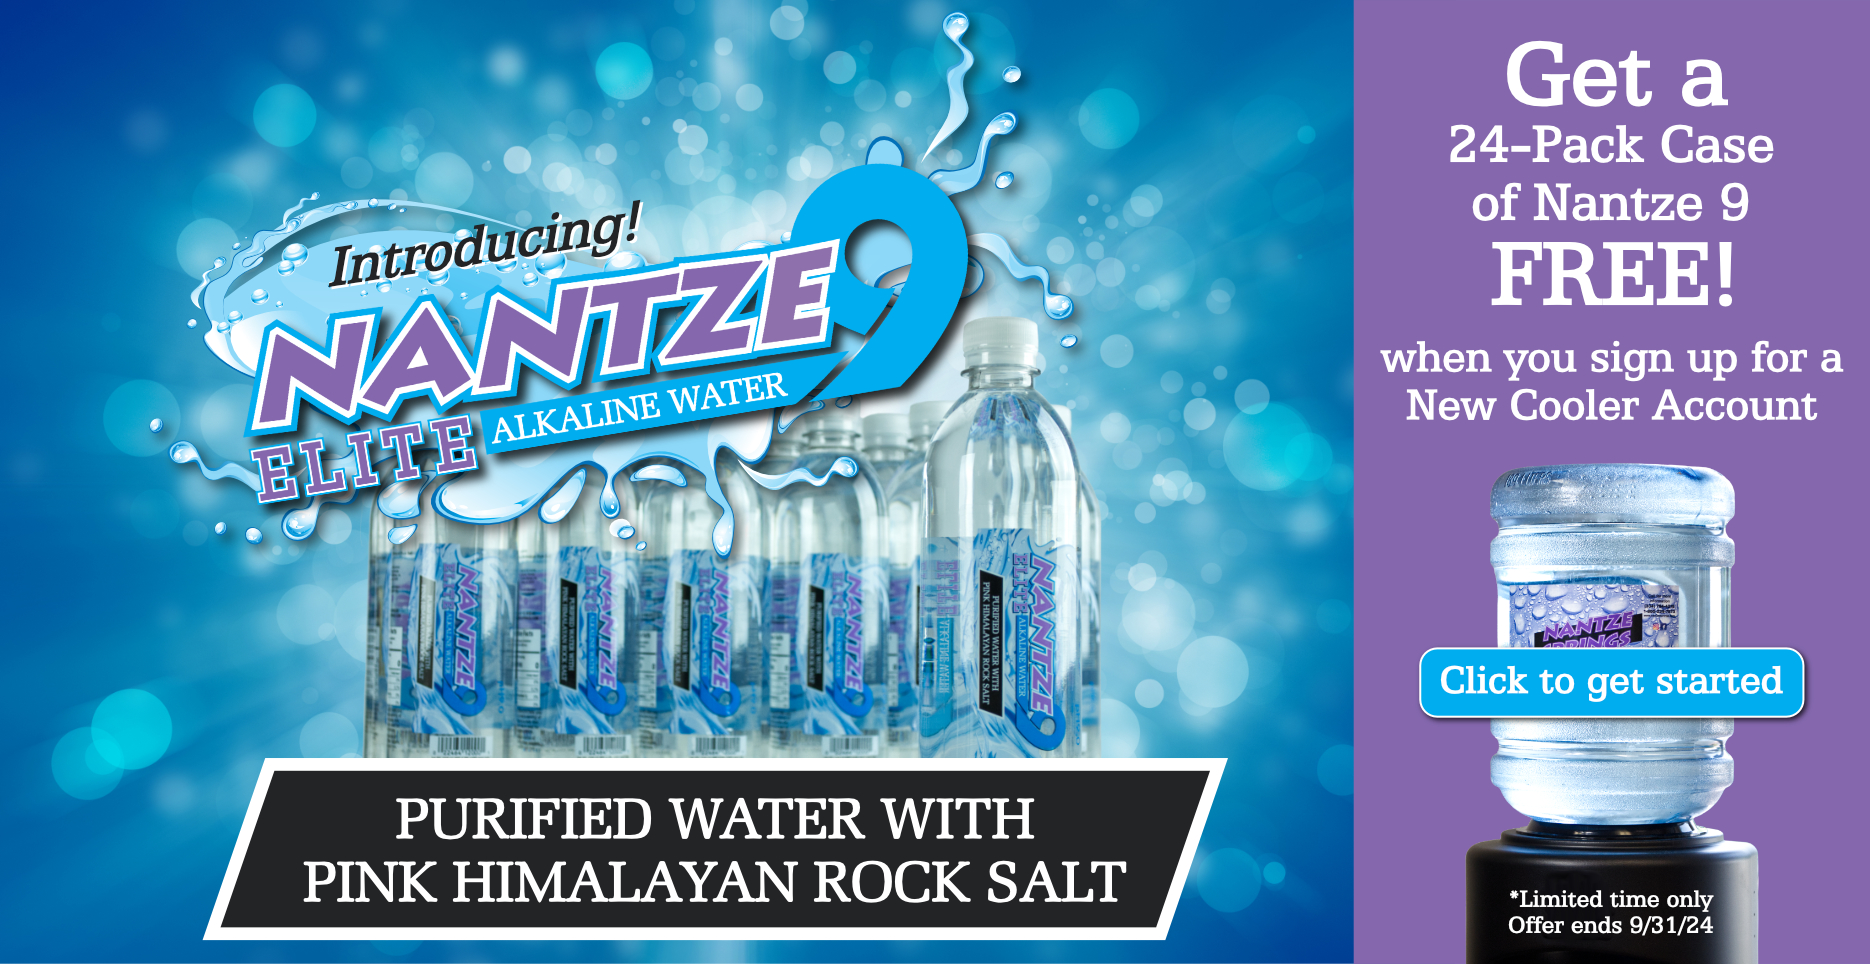 New Customer Special - Get a 24-pack Case of new Nantze 9 Elite with purchase of a new cooler account!